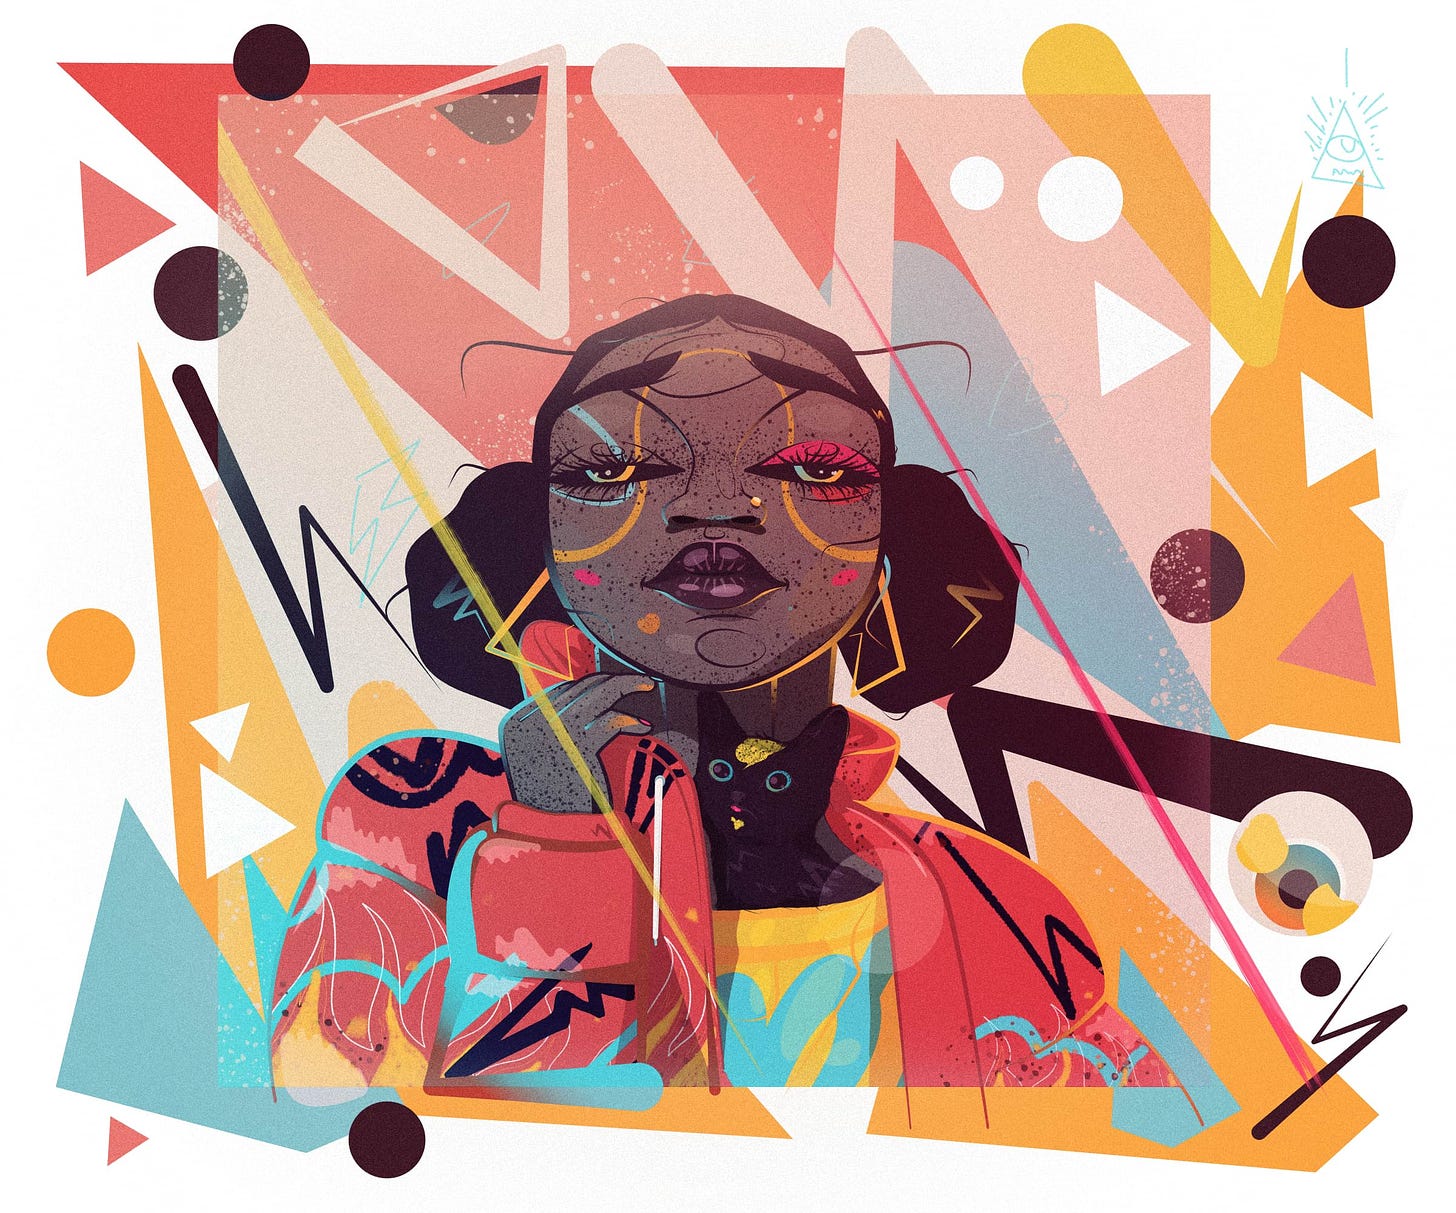 Random splattering of geometric shapes layered around a drawing of a girl with two hair buns, popping the collar of her jacket